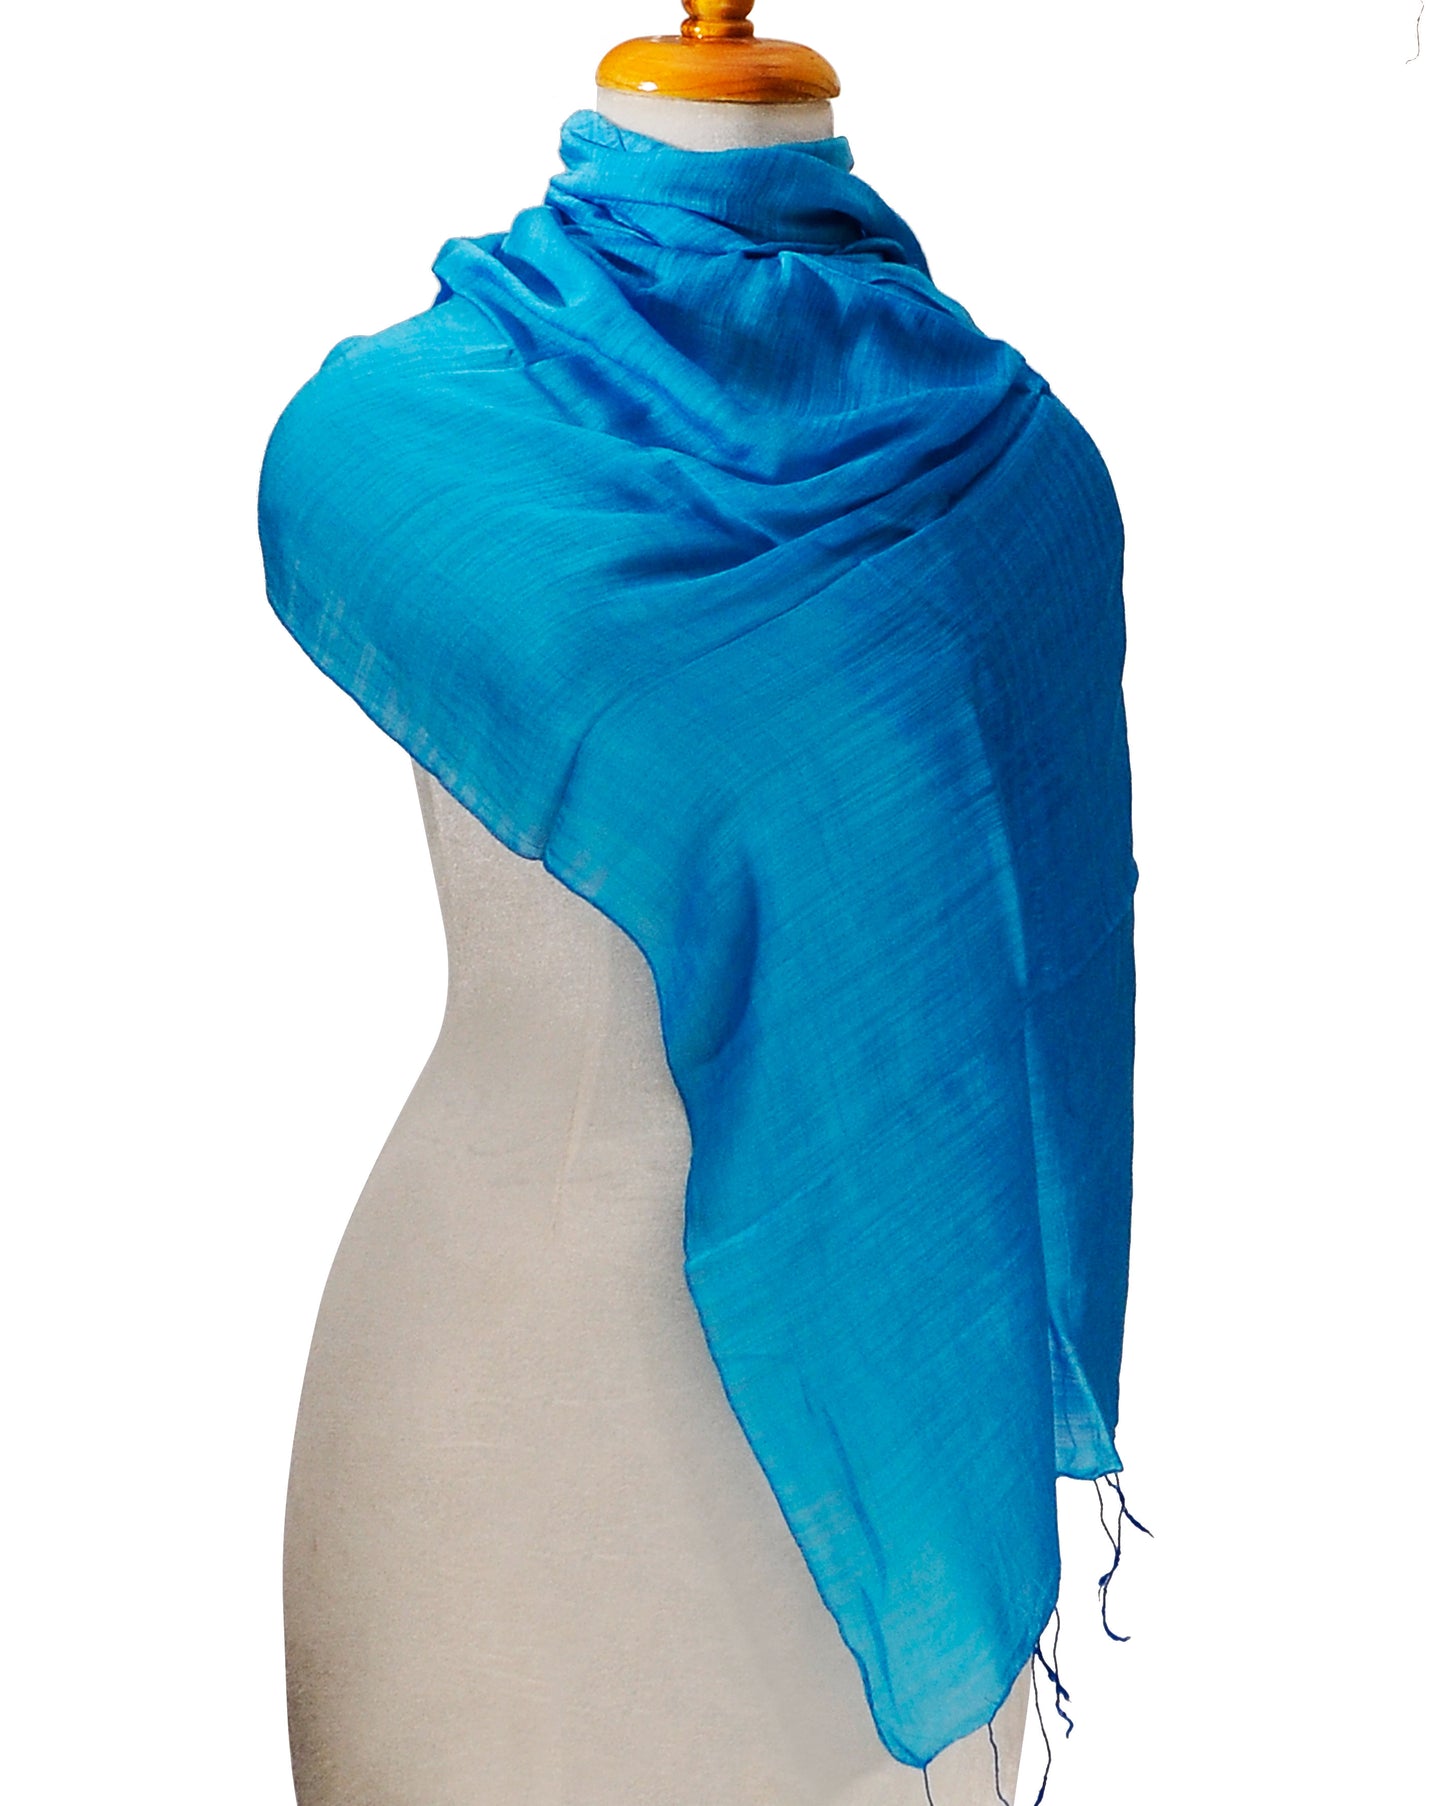 Large Vietnamese Silk Soft Wrap Scarf Shawl Pashmina 70x30 inches New from Vietnam